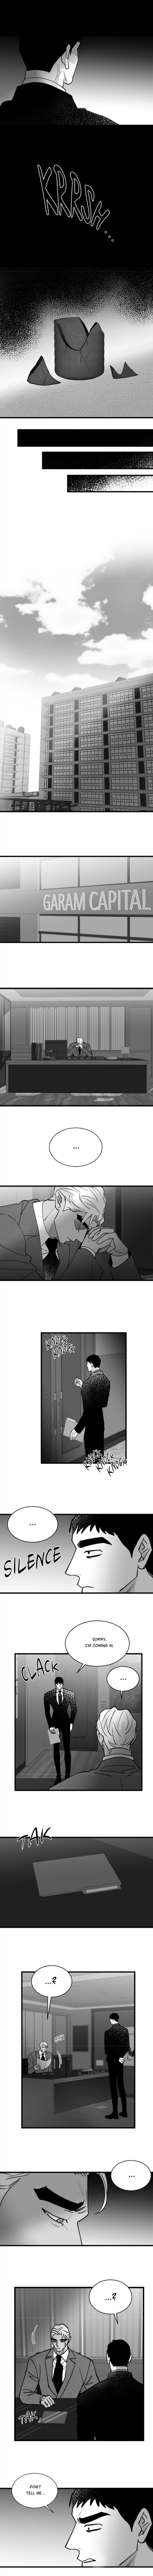 Bound To Be Fools - Page 3